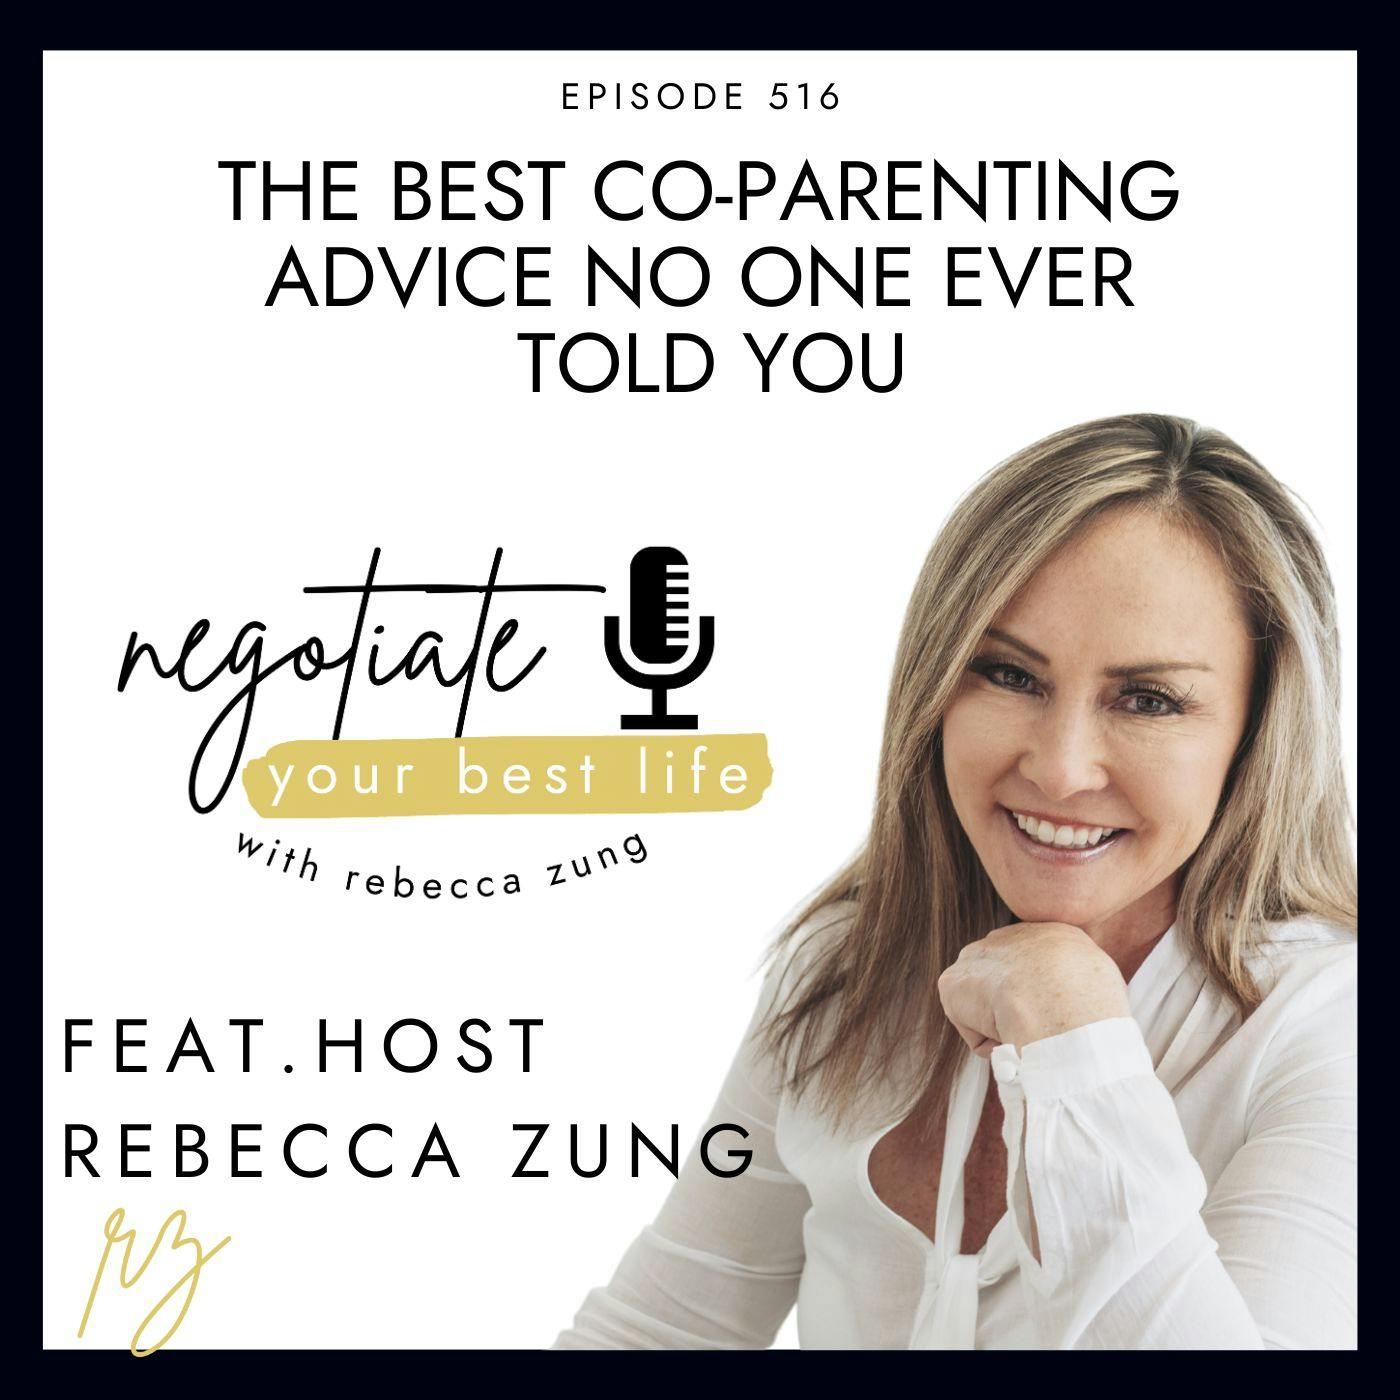 The Best Co-Parenting Advice No one Ever Told You with Rebecca Zung on Negotiate Your Best Life #516